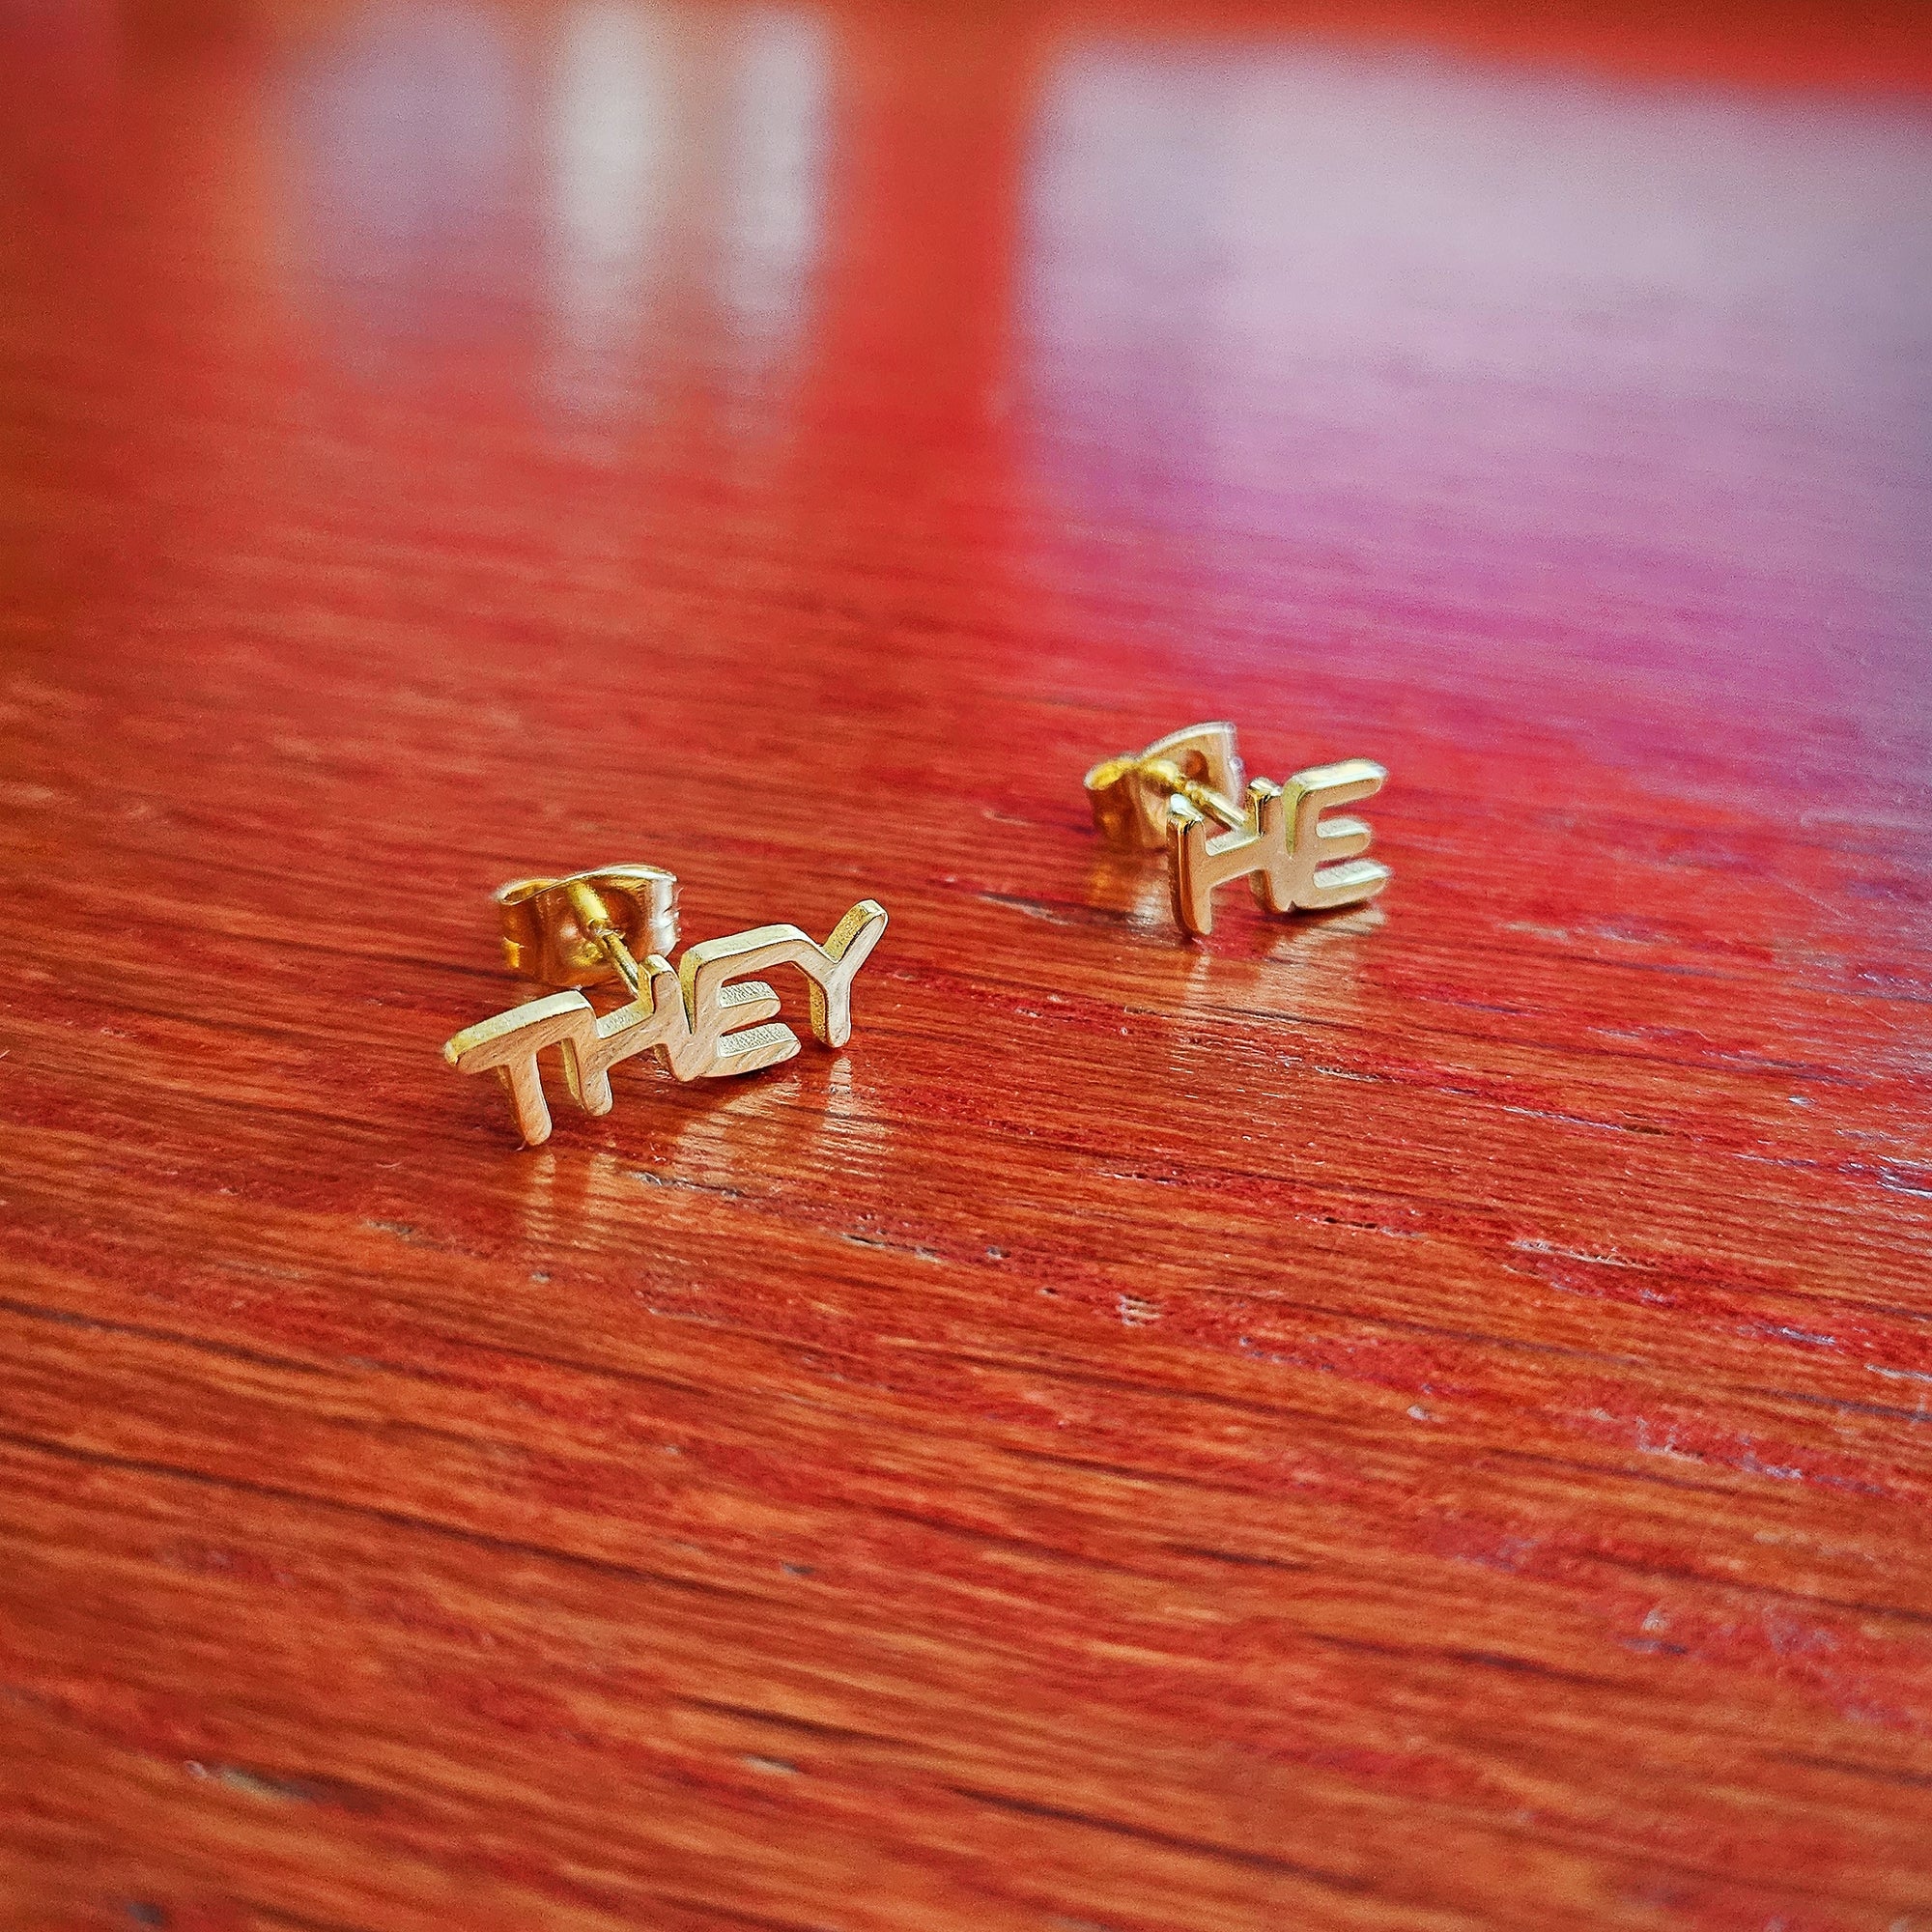 Gold Pronoun Stud Earrings - he/they or they/he